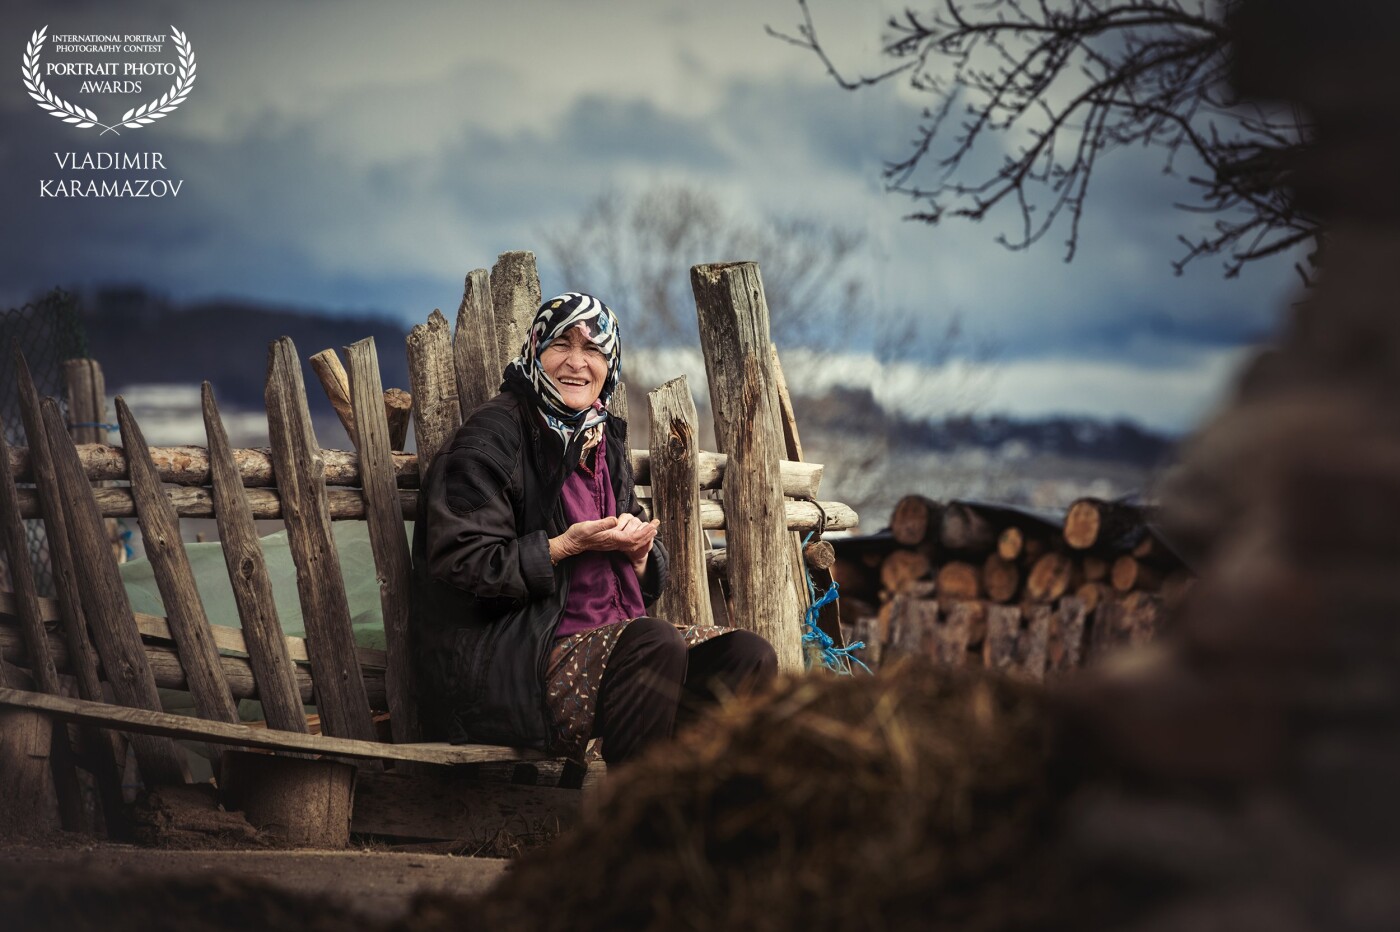 Mountain women are extremely strong and are the foundation of the family. They work on an equal footing with men, take care of children and animals. But above all, they preserve the traditions of a people that is disappearing.